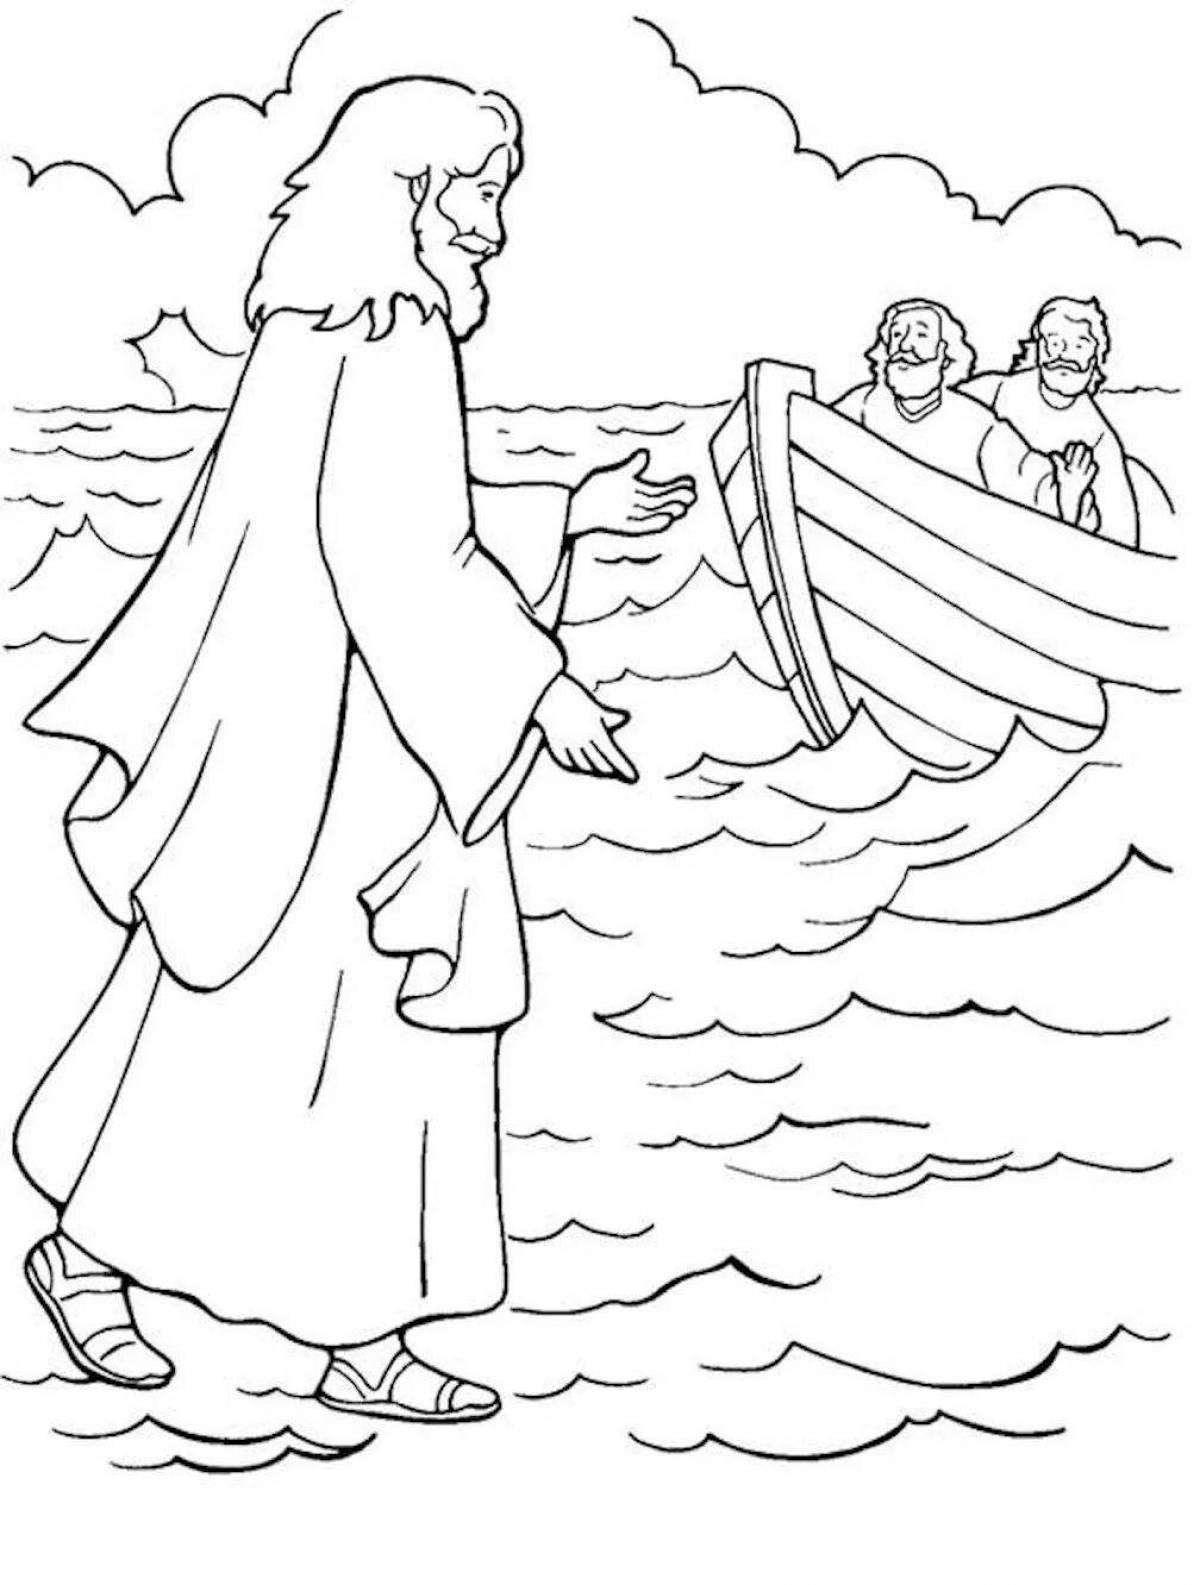 Crazy bible coloring book for kids